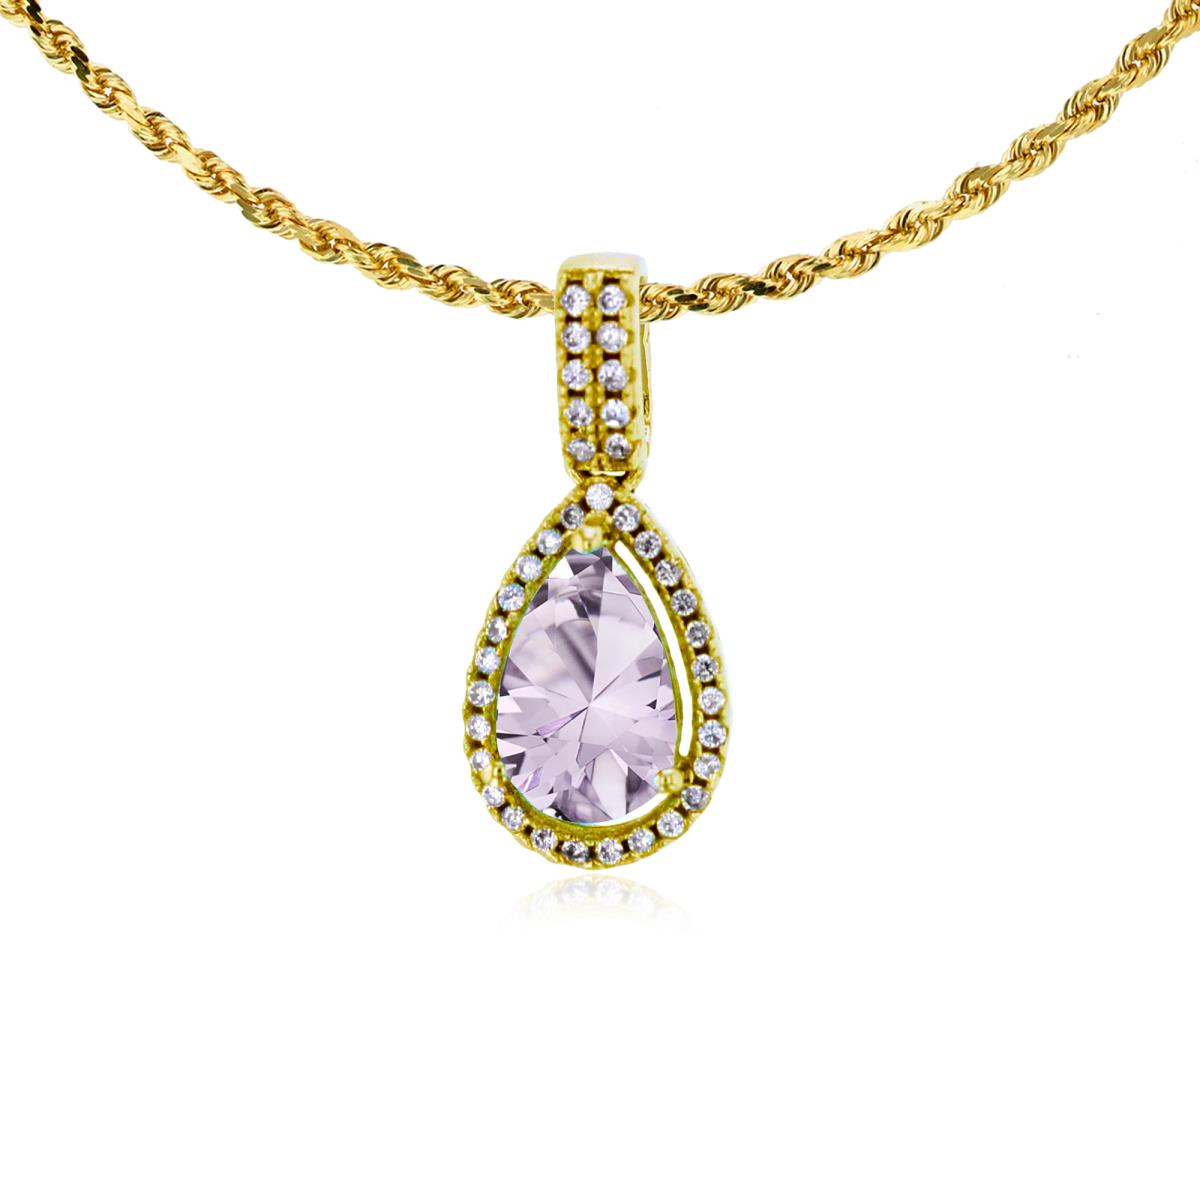 10K Yellow Gold 8x5mm Pear Cut Rose De France & 0.11 CTTW Diamond Halo 18" Rope Chain Necklace